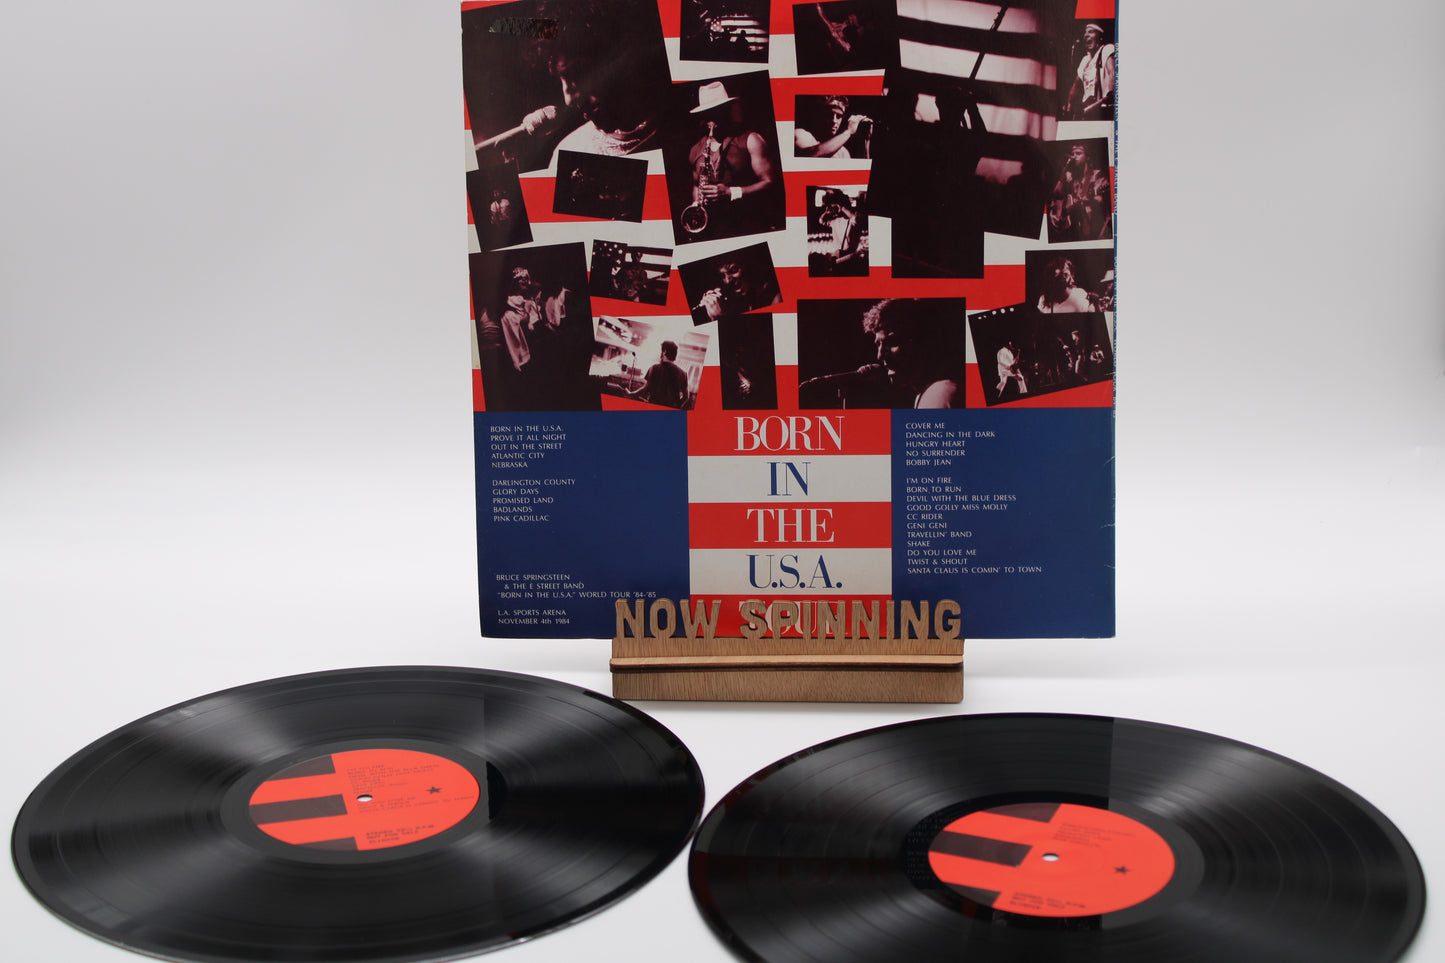 Bruce Springsteen & The E Street Band “Born In The USA World Tour 84-85 Live Unofficial Vinyl